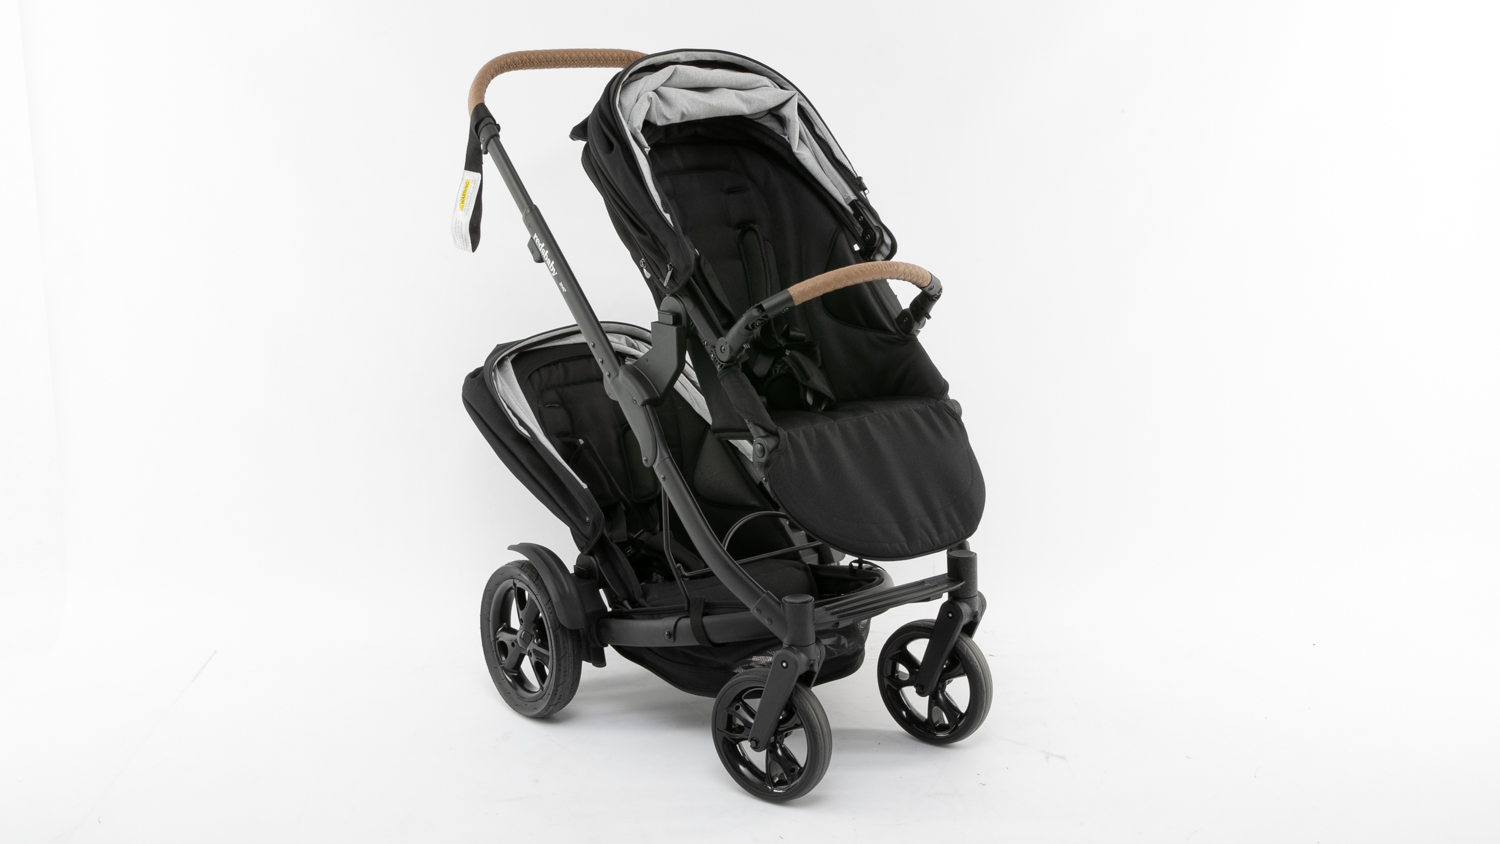 Redsbaby Jive³ Stroller and Second Seat carousel image